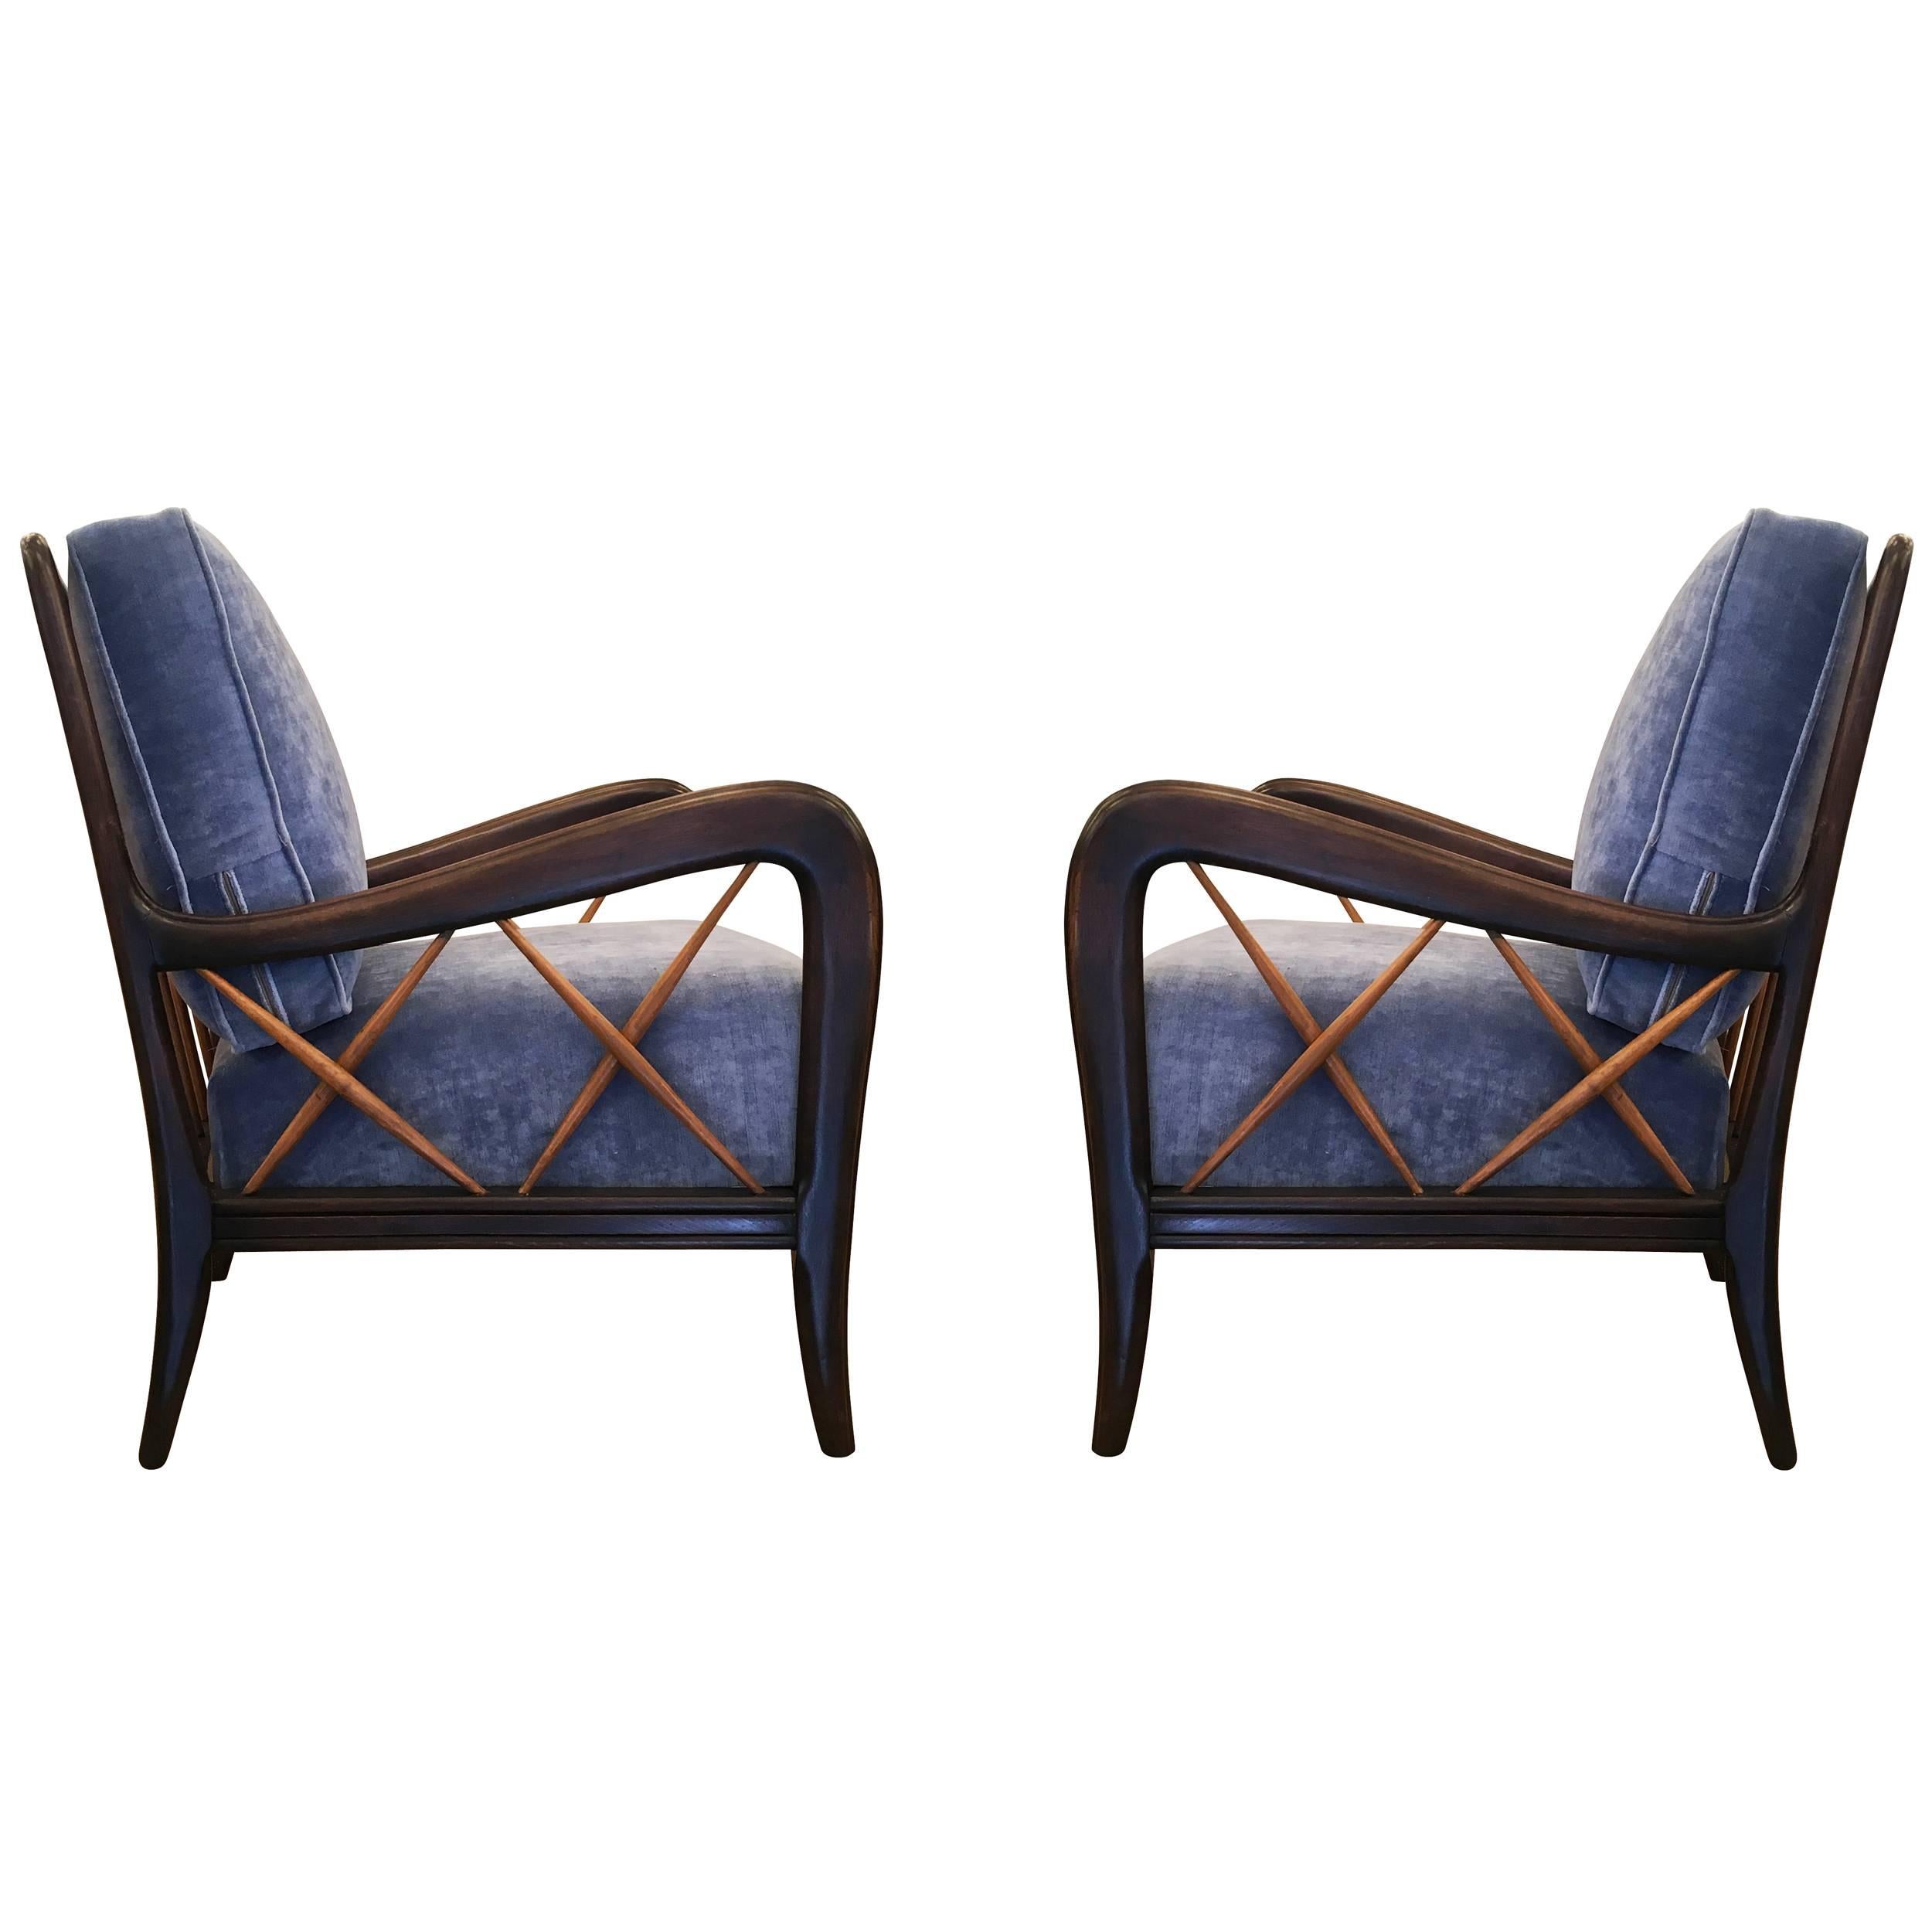 Sculptural Pair of Armchairs Attributed to Paolo Buffa, Italy, 1950s